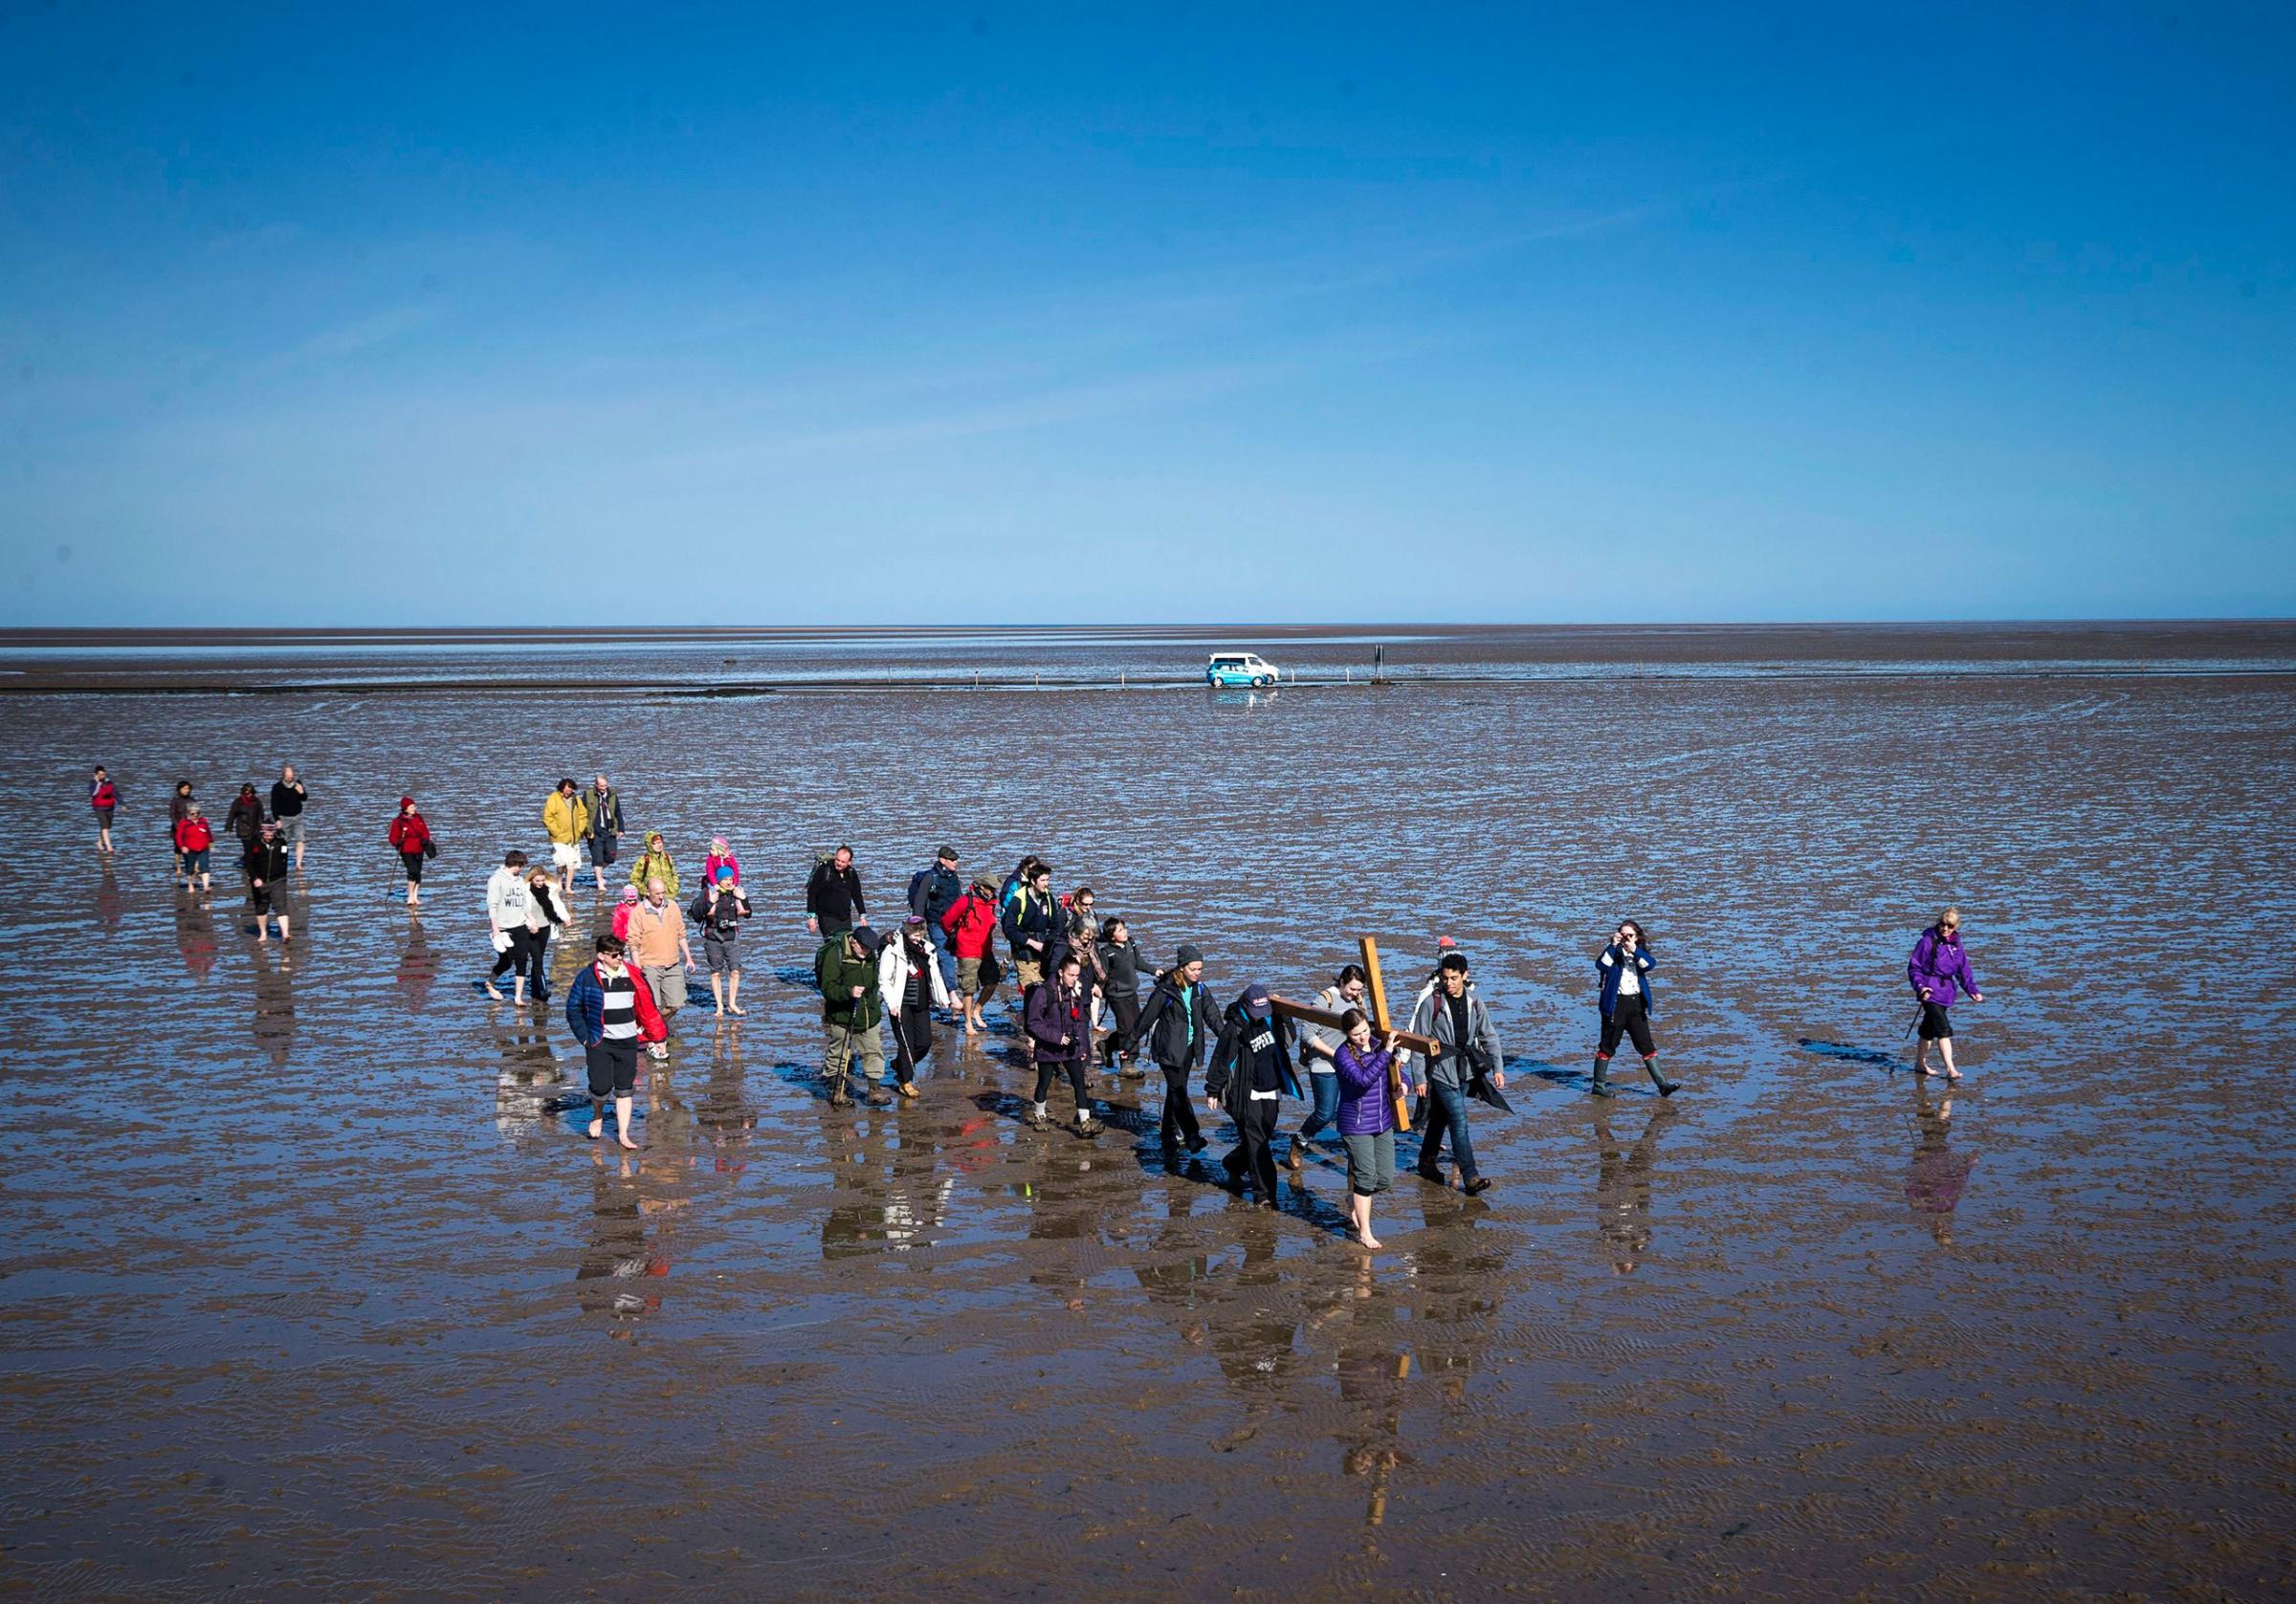 Pilgrims carry a cross on the final leg of the Northern Cross pilgrimage to Holy Island near Berwick-upon-Tweed in Northumberland, England, March 25, 2016.